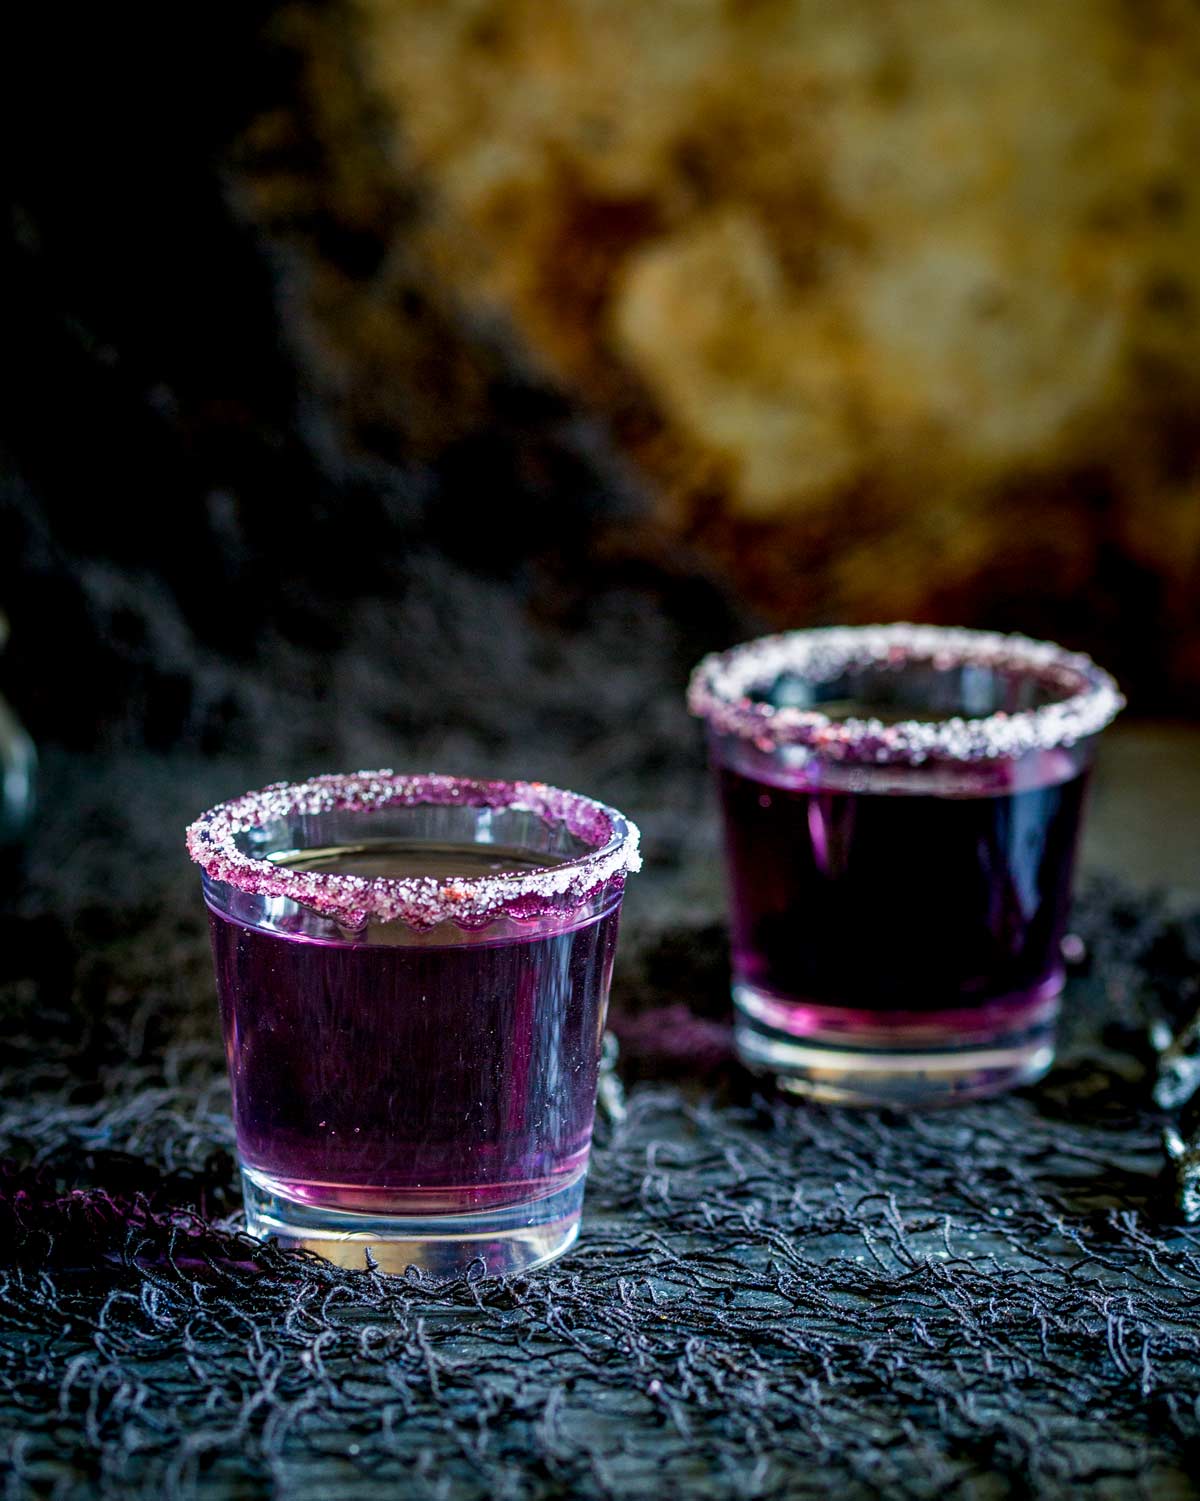 Two shot glasses with purple cocktails in them, on a black table.